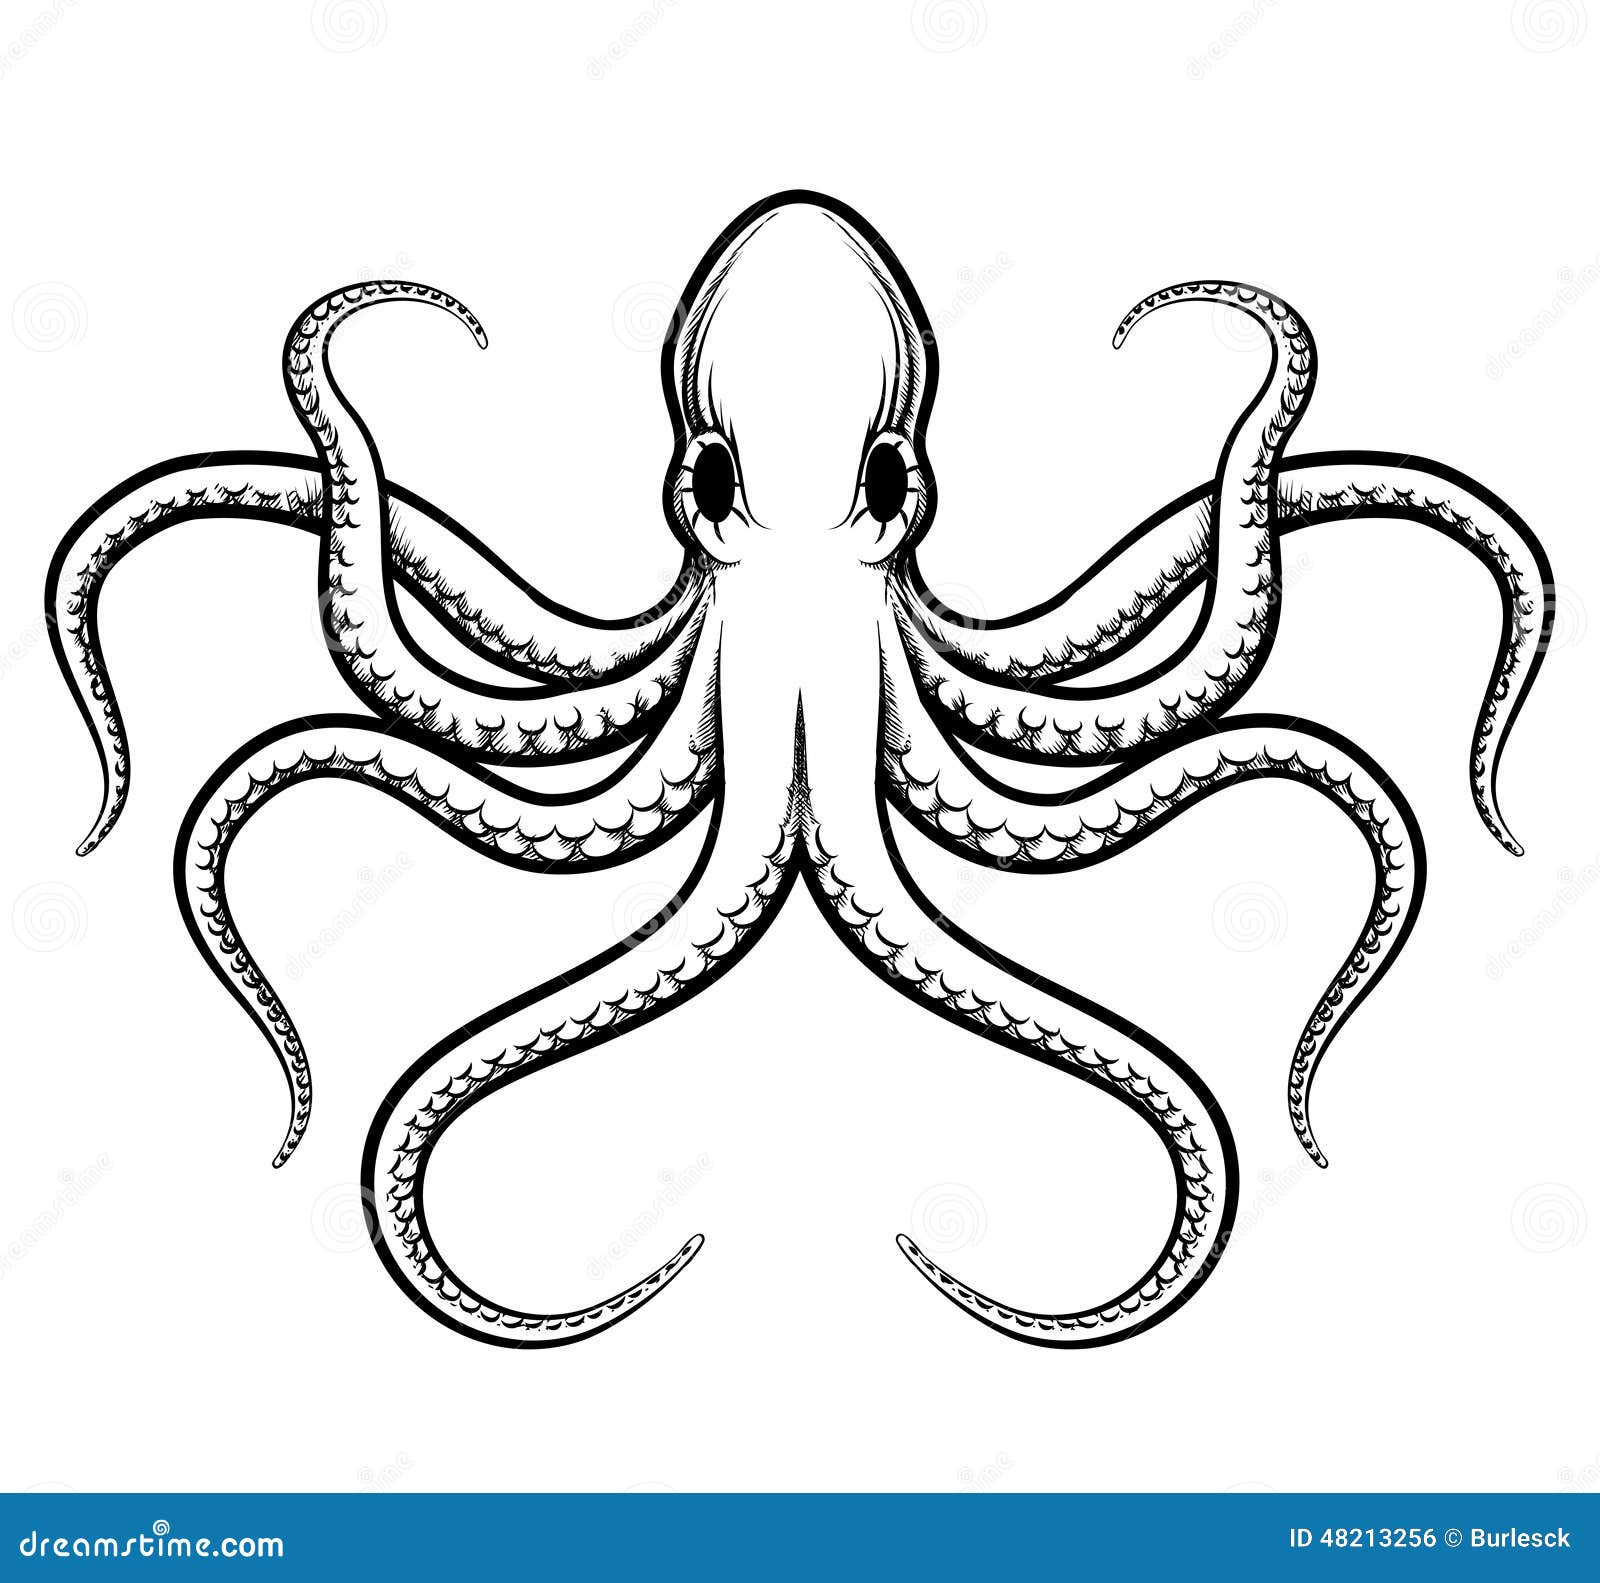 octopus clipart vector free - photo #48